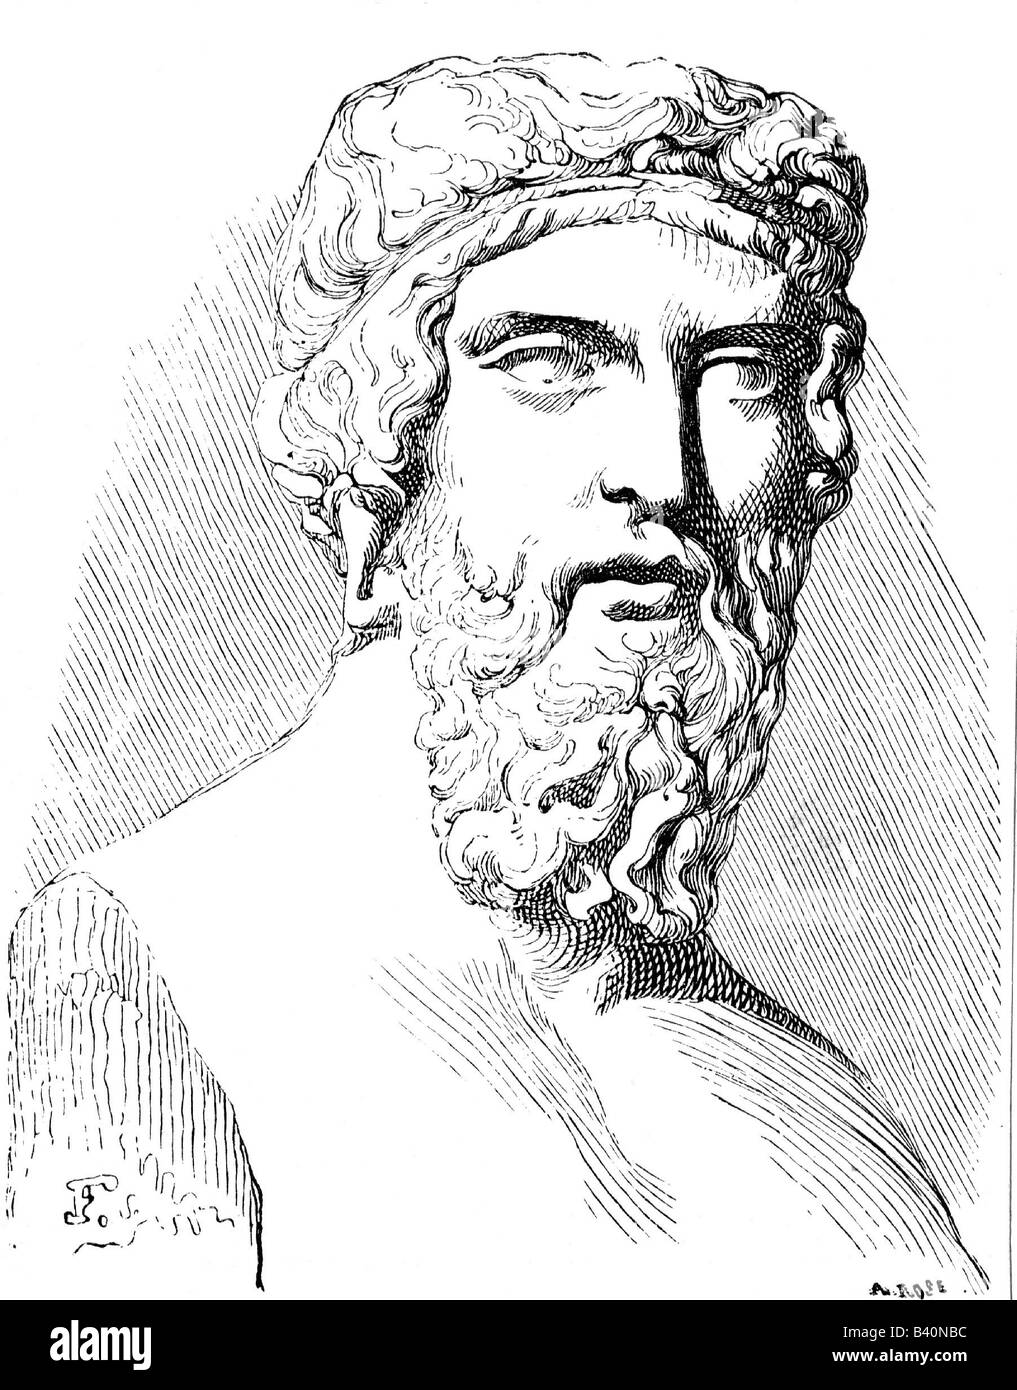 Plato, 427 BC - 347 BC, Greek philosopher, portrait, engraving after ancient bust, 19th century, Stock Photo